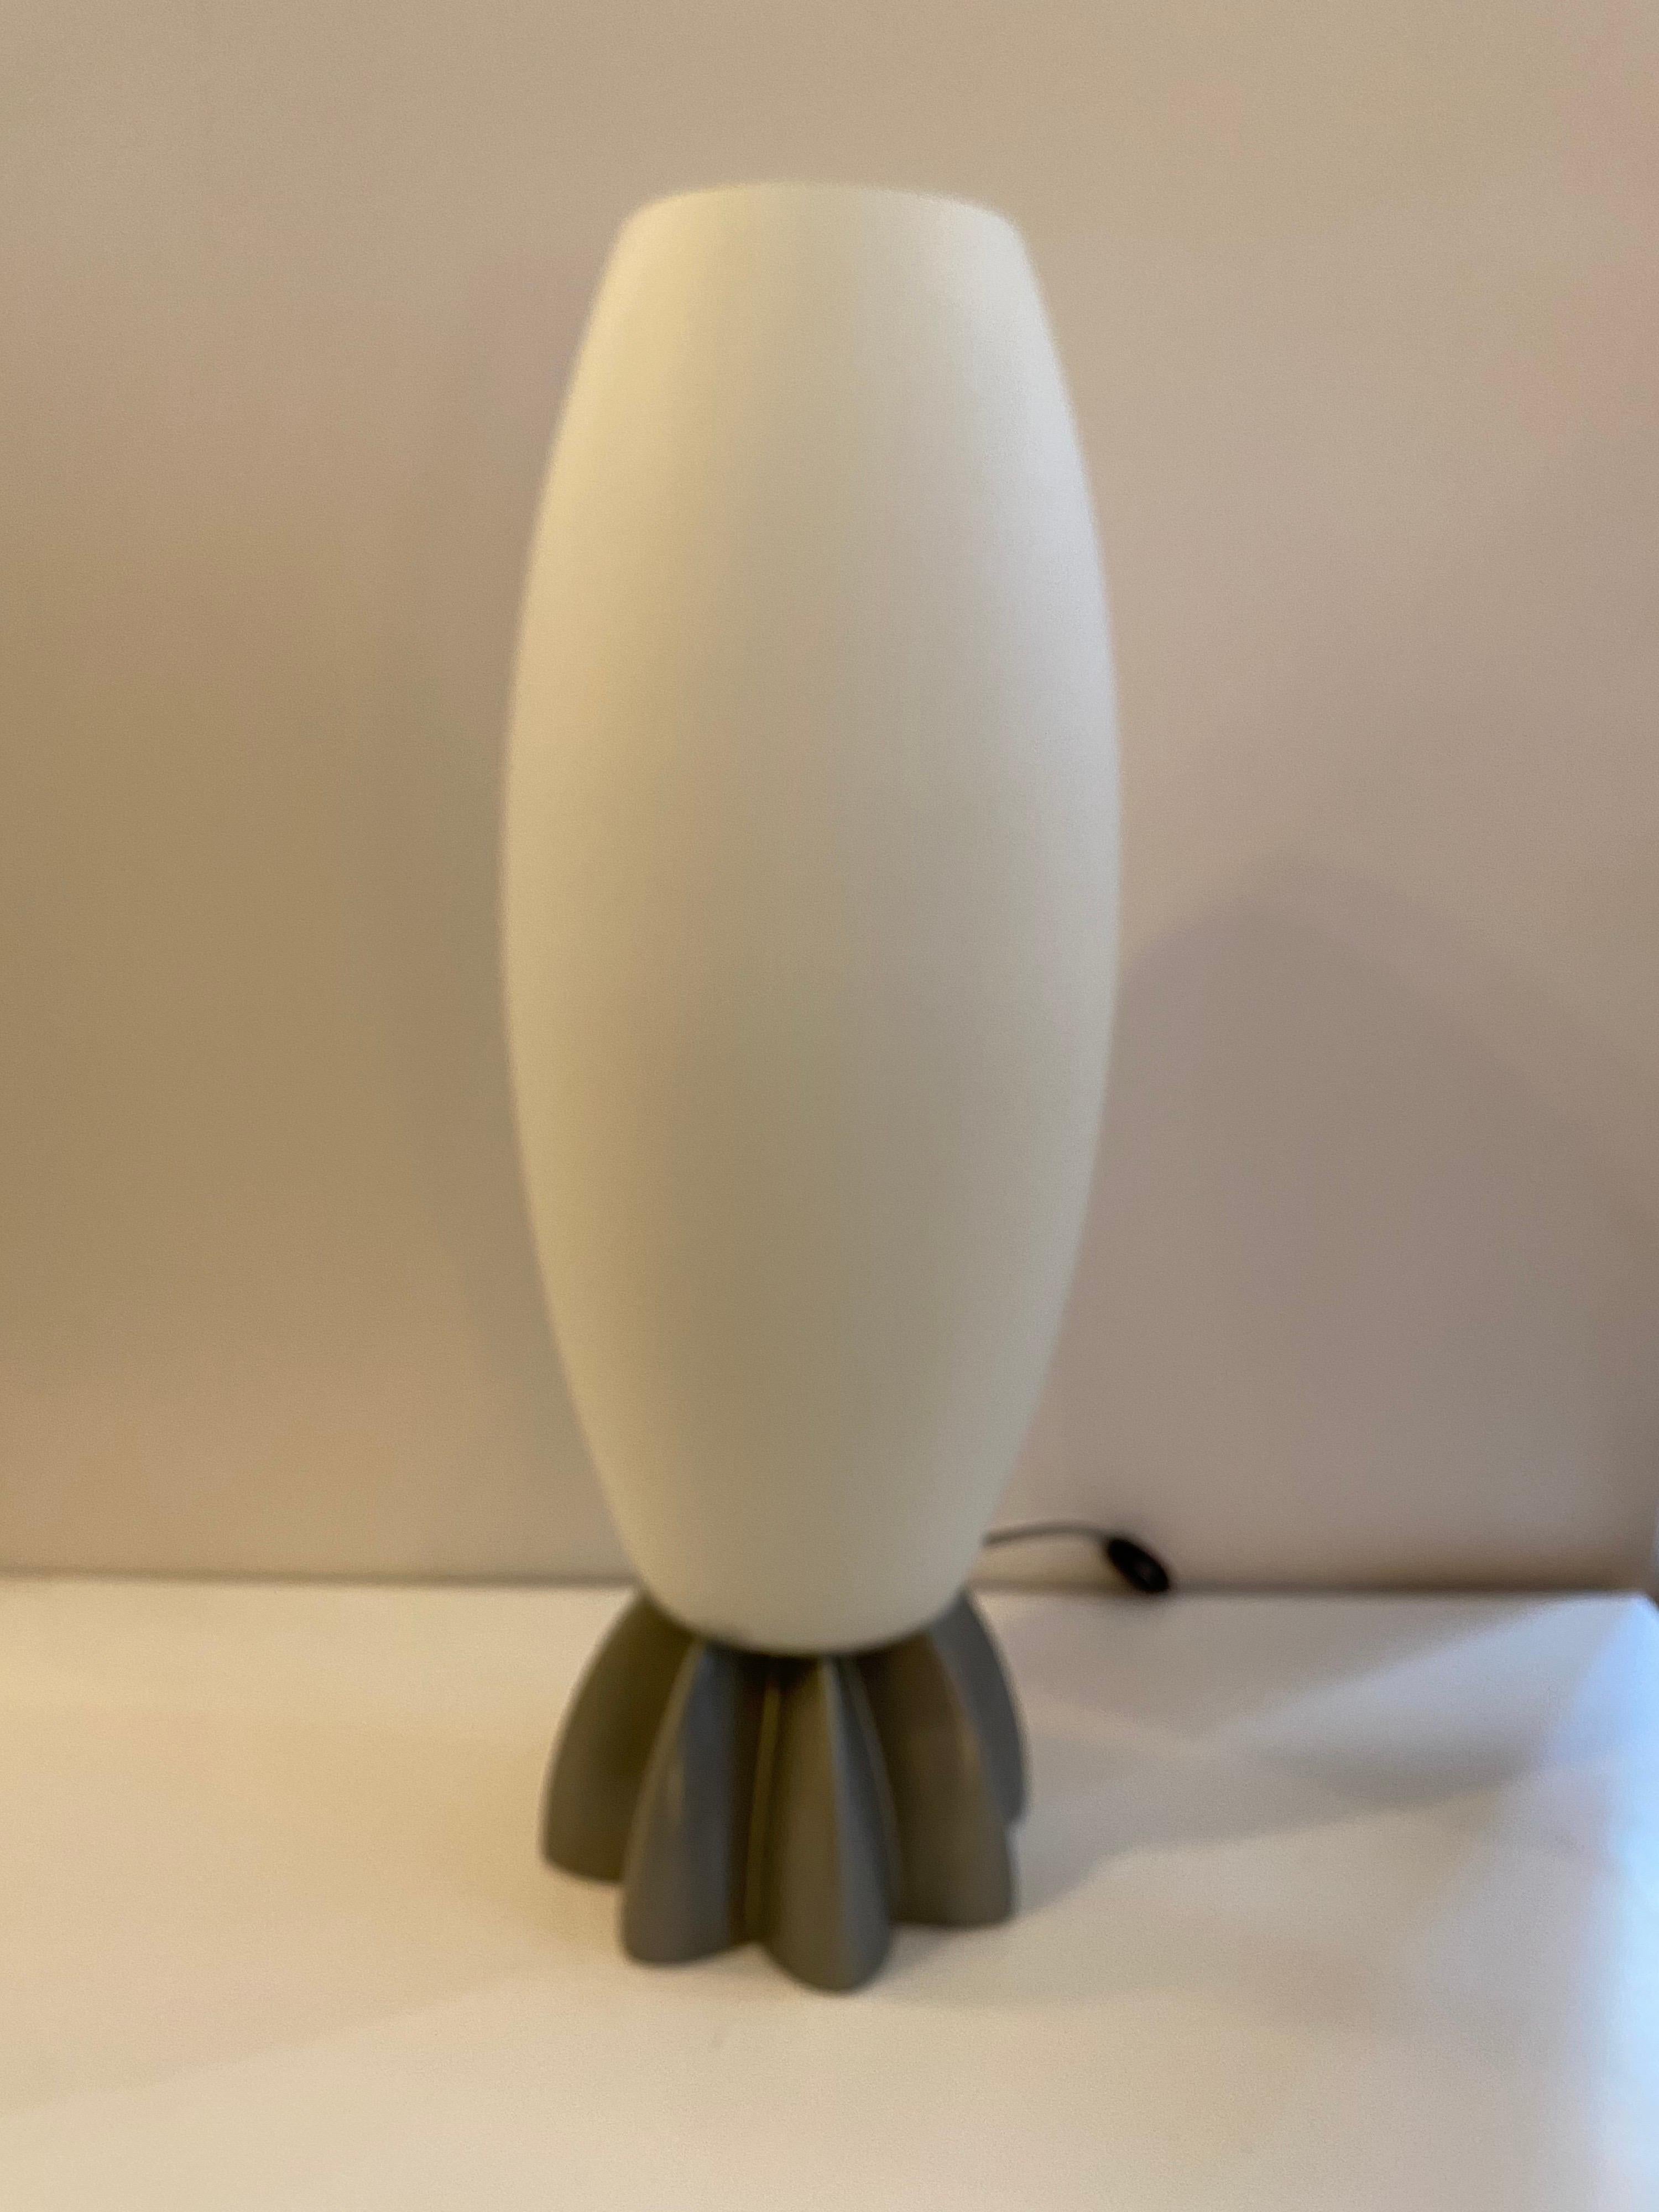 Rodolfo Dordoni for Foscarini murano glass table lamp. Very nice condition, painted silver base with a frosted murano glass shade. Nice size and glow when illuminated!